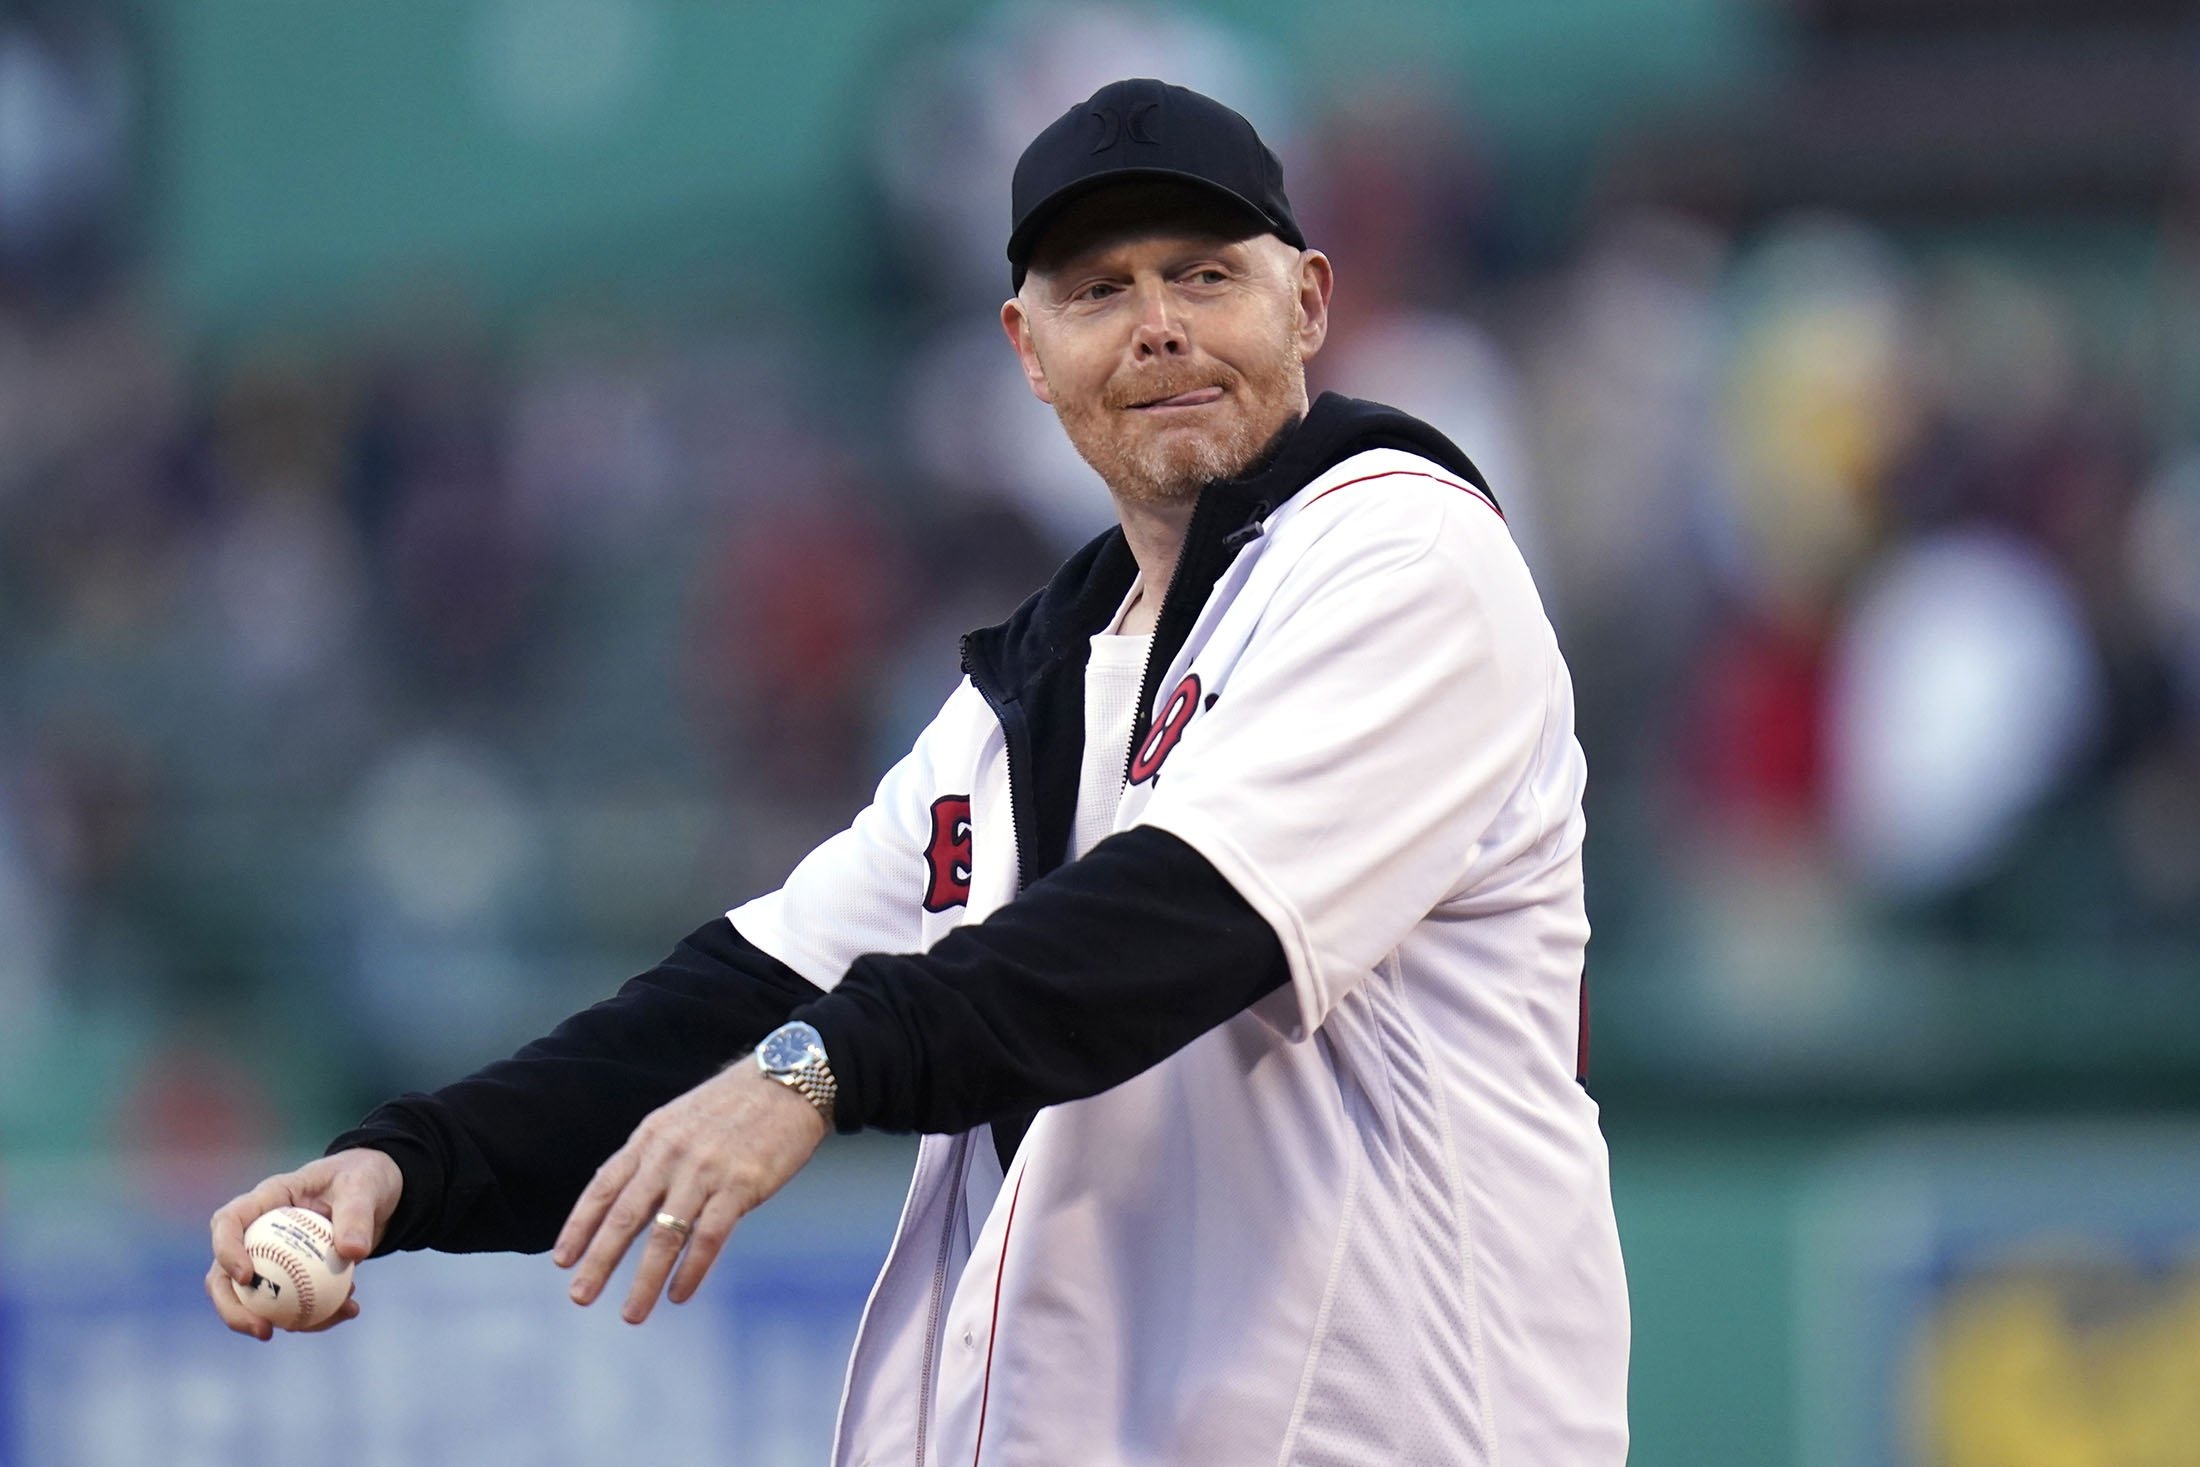 Bill Burr throws out the ceremonial first pitch prior to a baseball game between the Boston Red Sox and Toronto Blue Jays, at Fenway Park in Boston, U.S., April 19, 2022. (AP Photo)